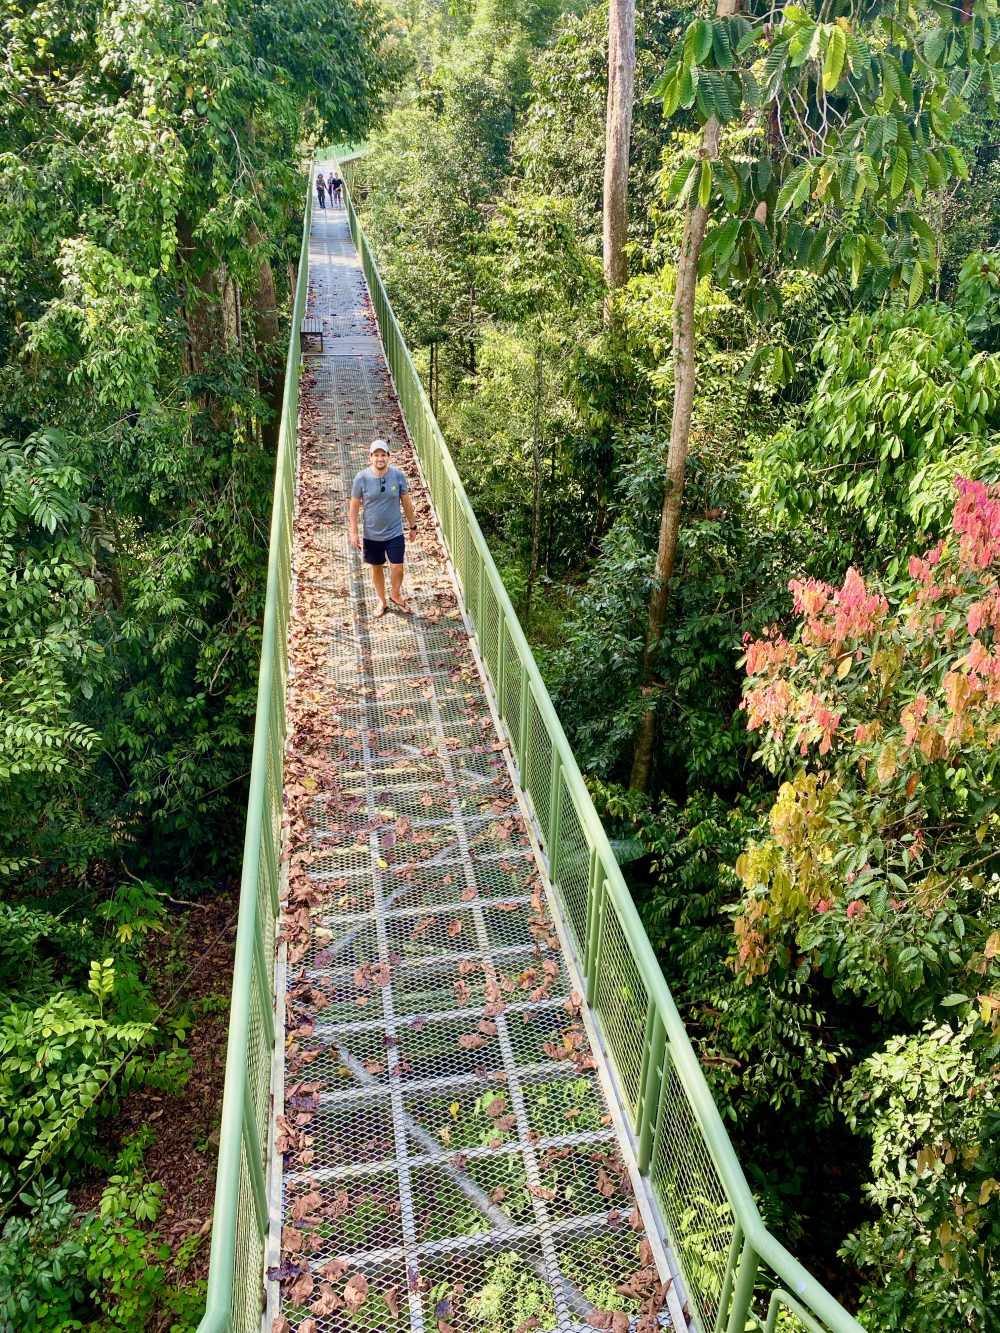 The elevated Sky Bridge at the Rainforest Discovery Centre in Sepilok, Sabah, Borneo